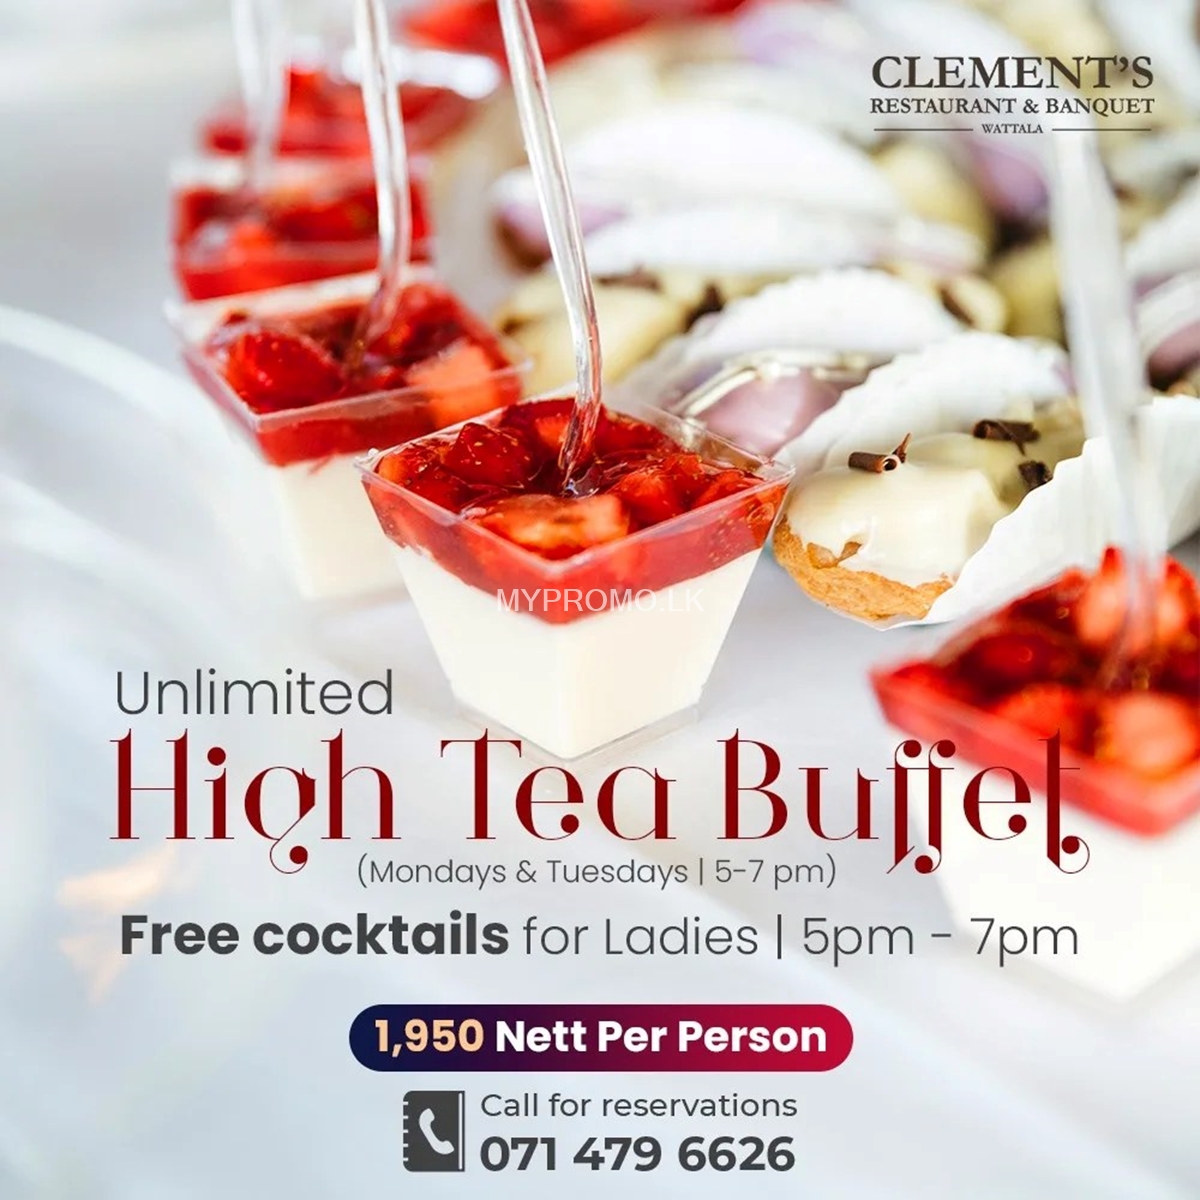 Unlimited High tea Buffet at Clement's Restaurant and Banquet